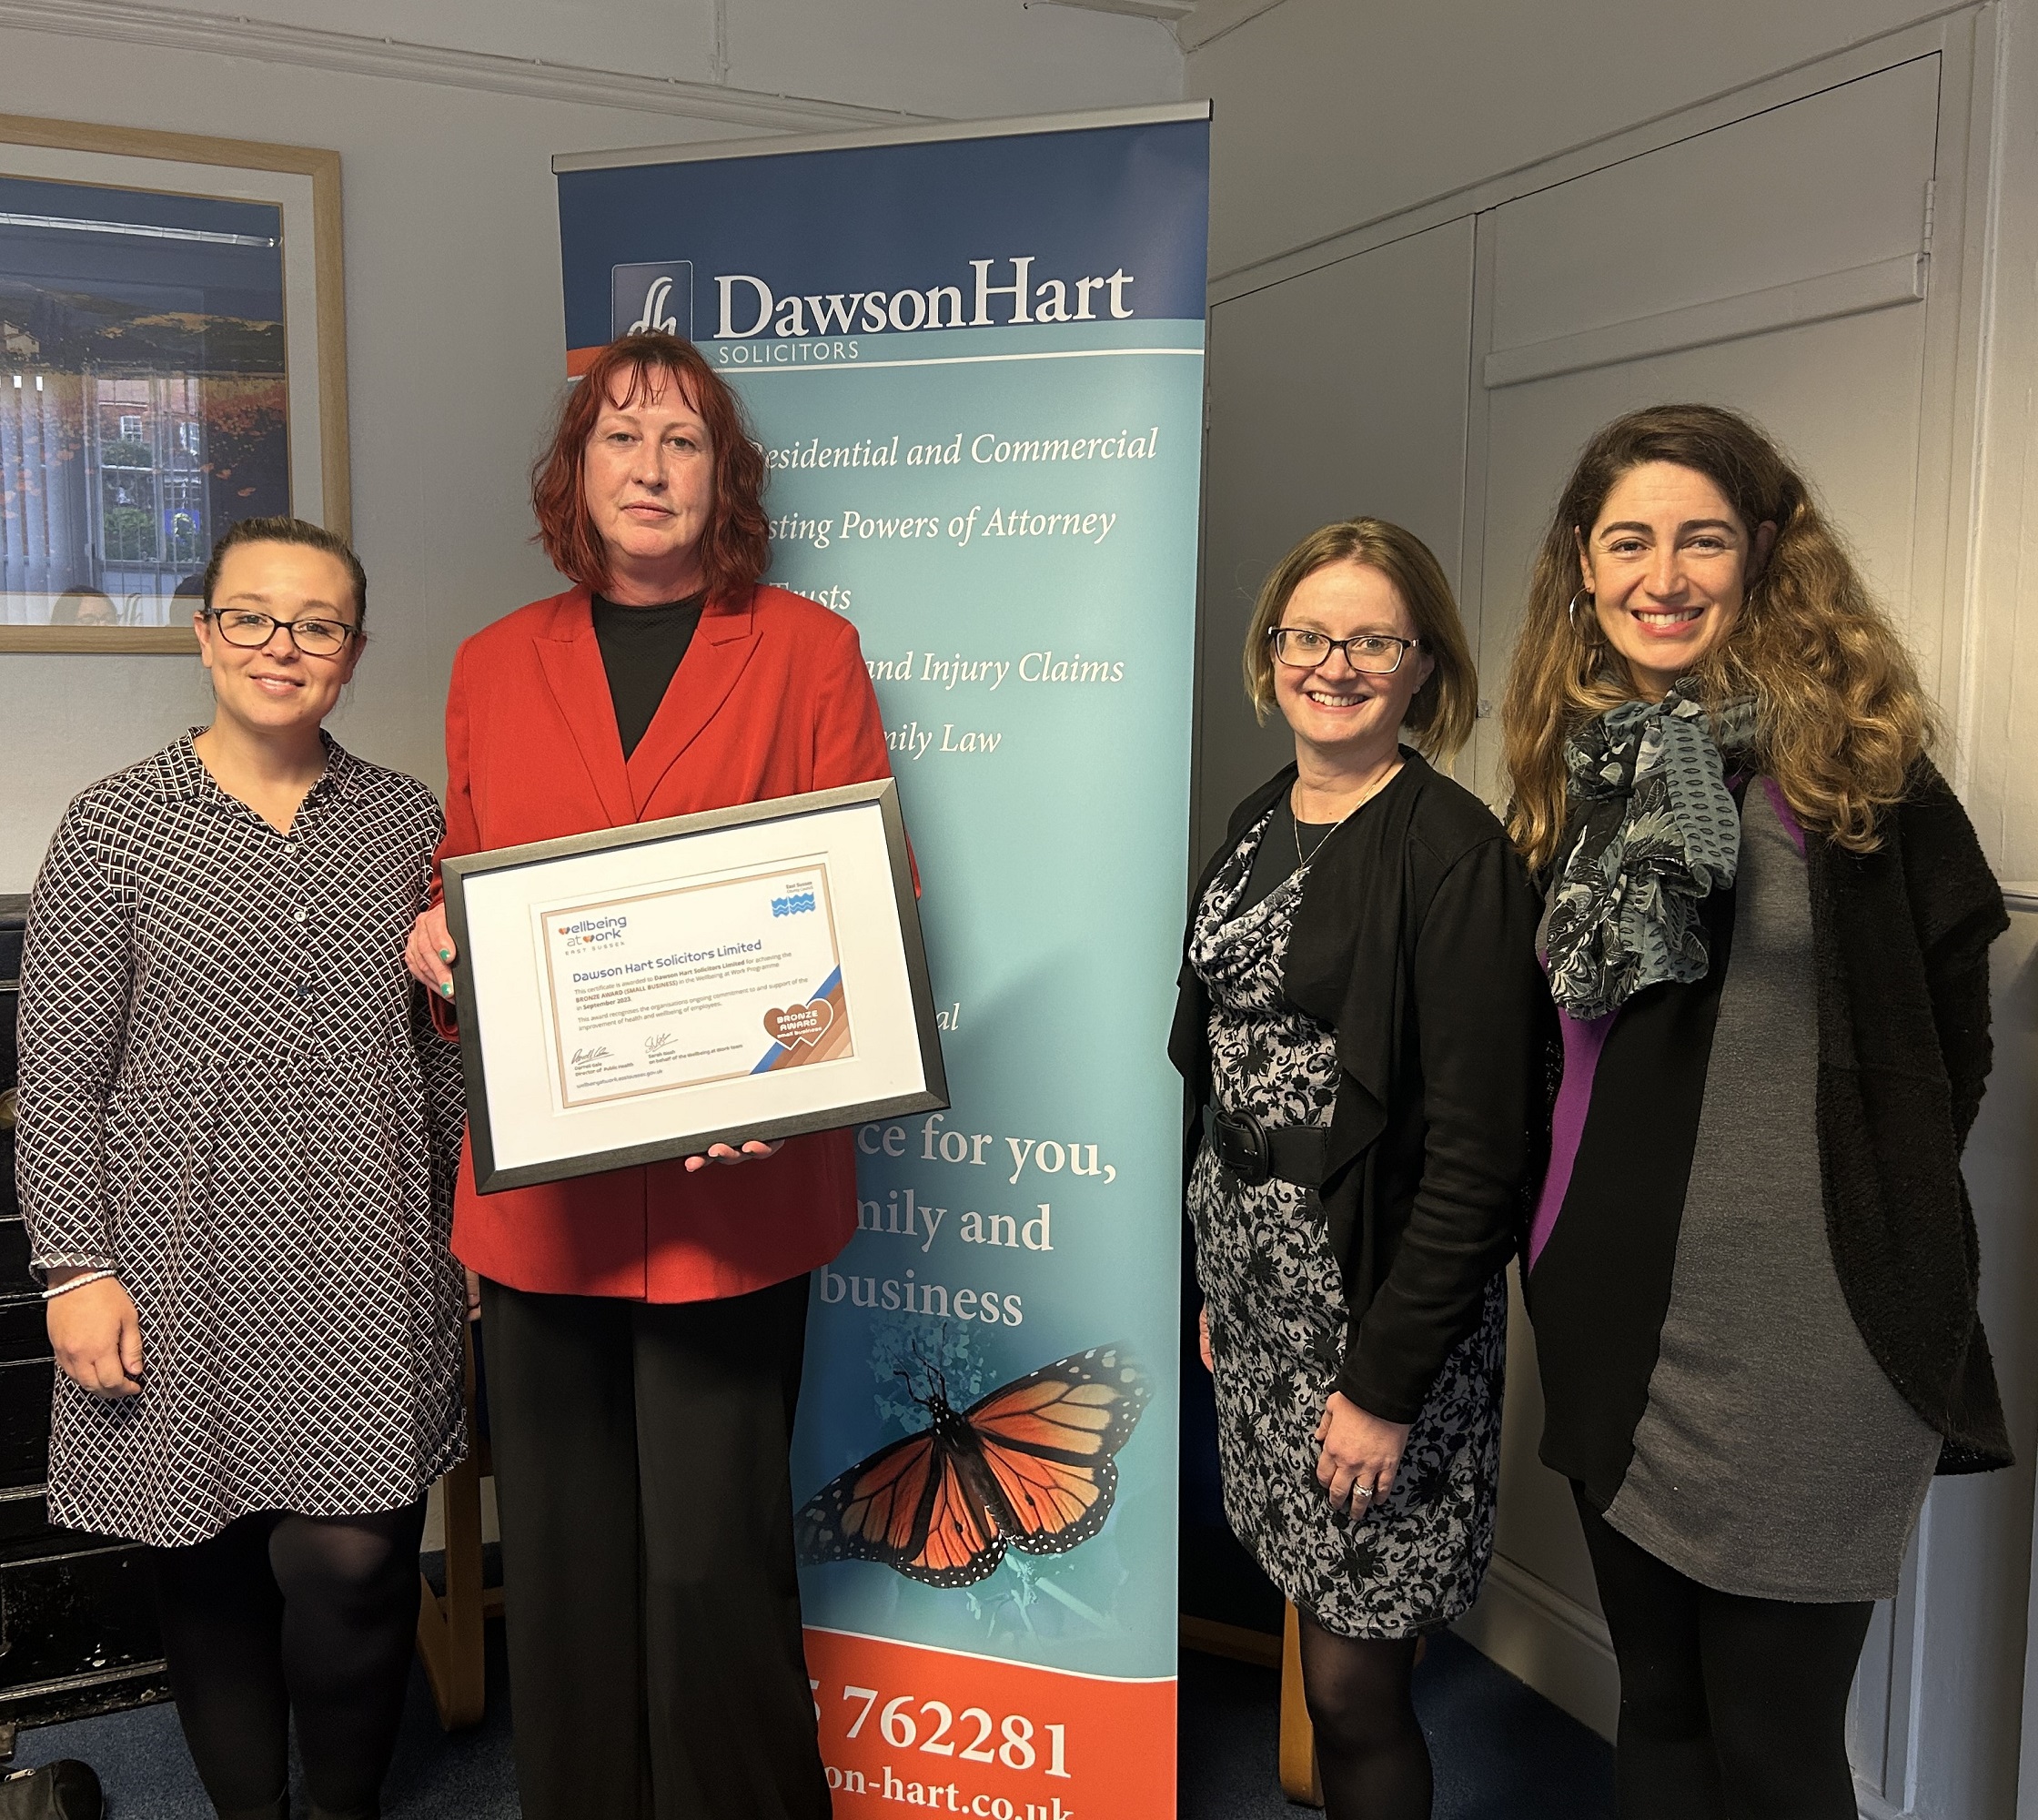 ESCC staff and Dawson Hart Solicitors employees awarded with framed certificate of Bronze Award Wellbeing at Work accreditation